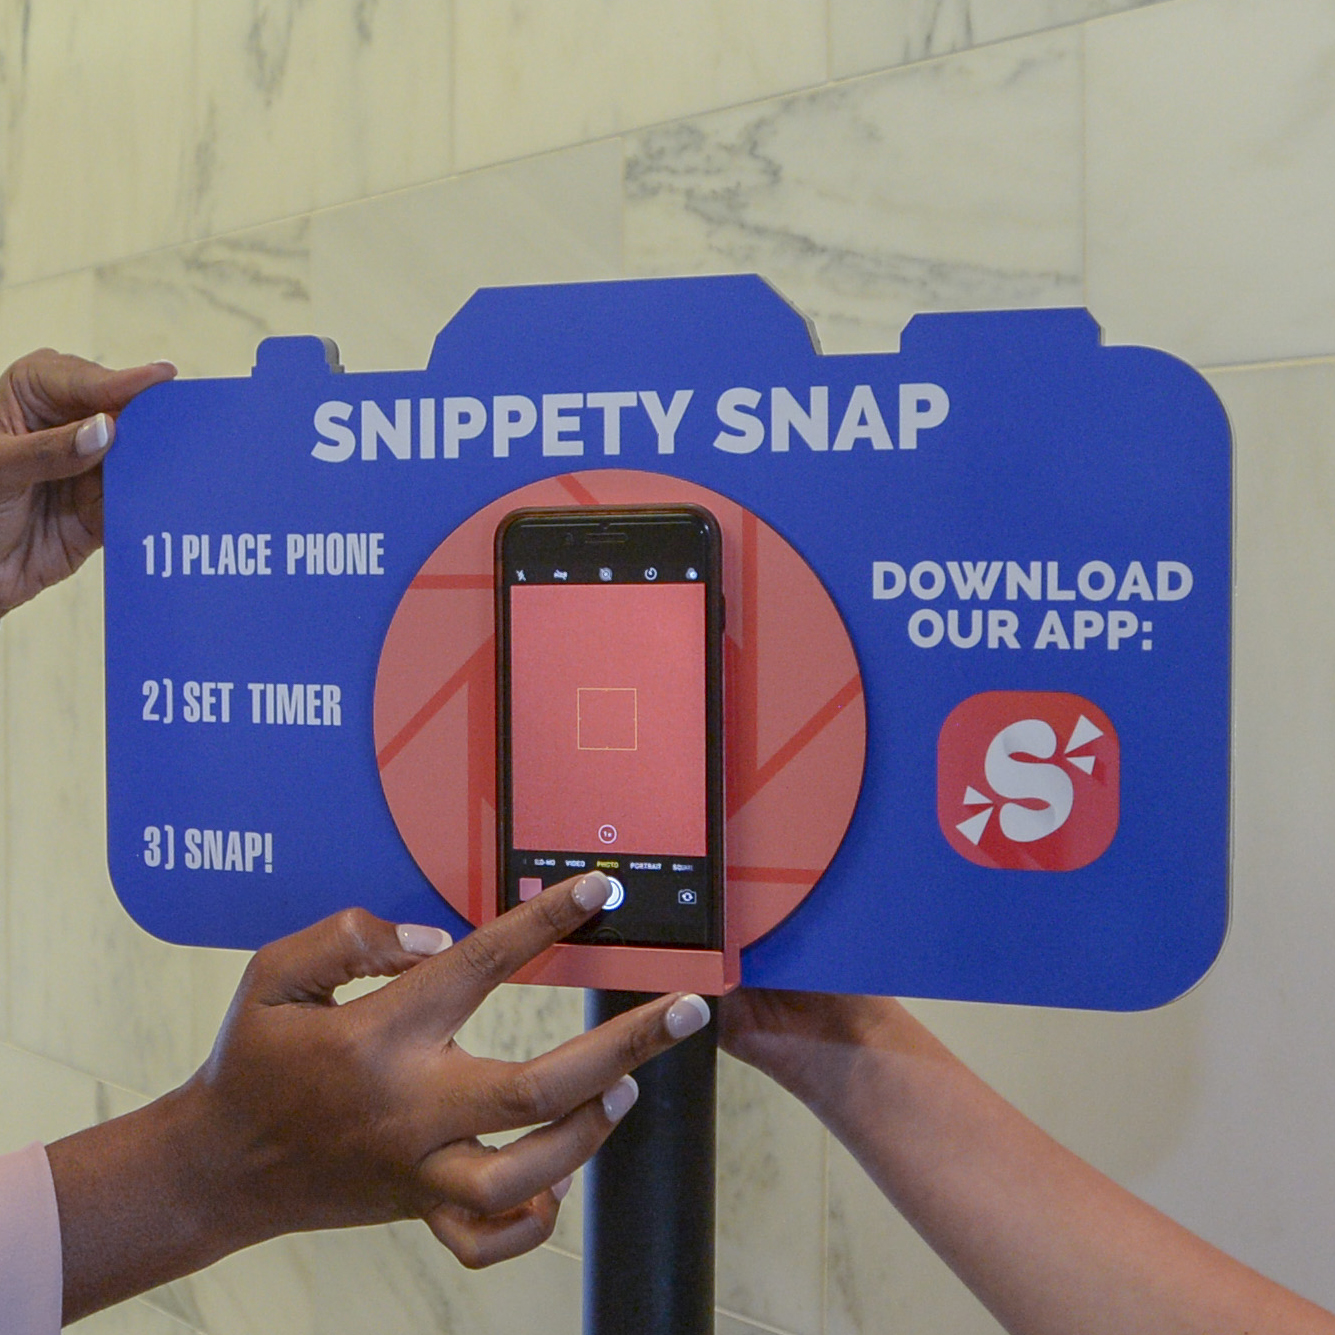 Snippety Snap demonstration